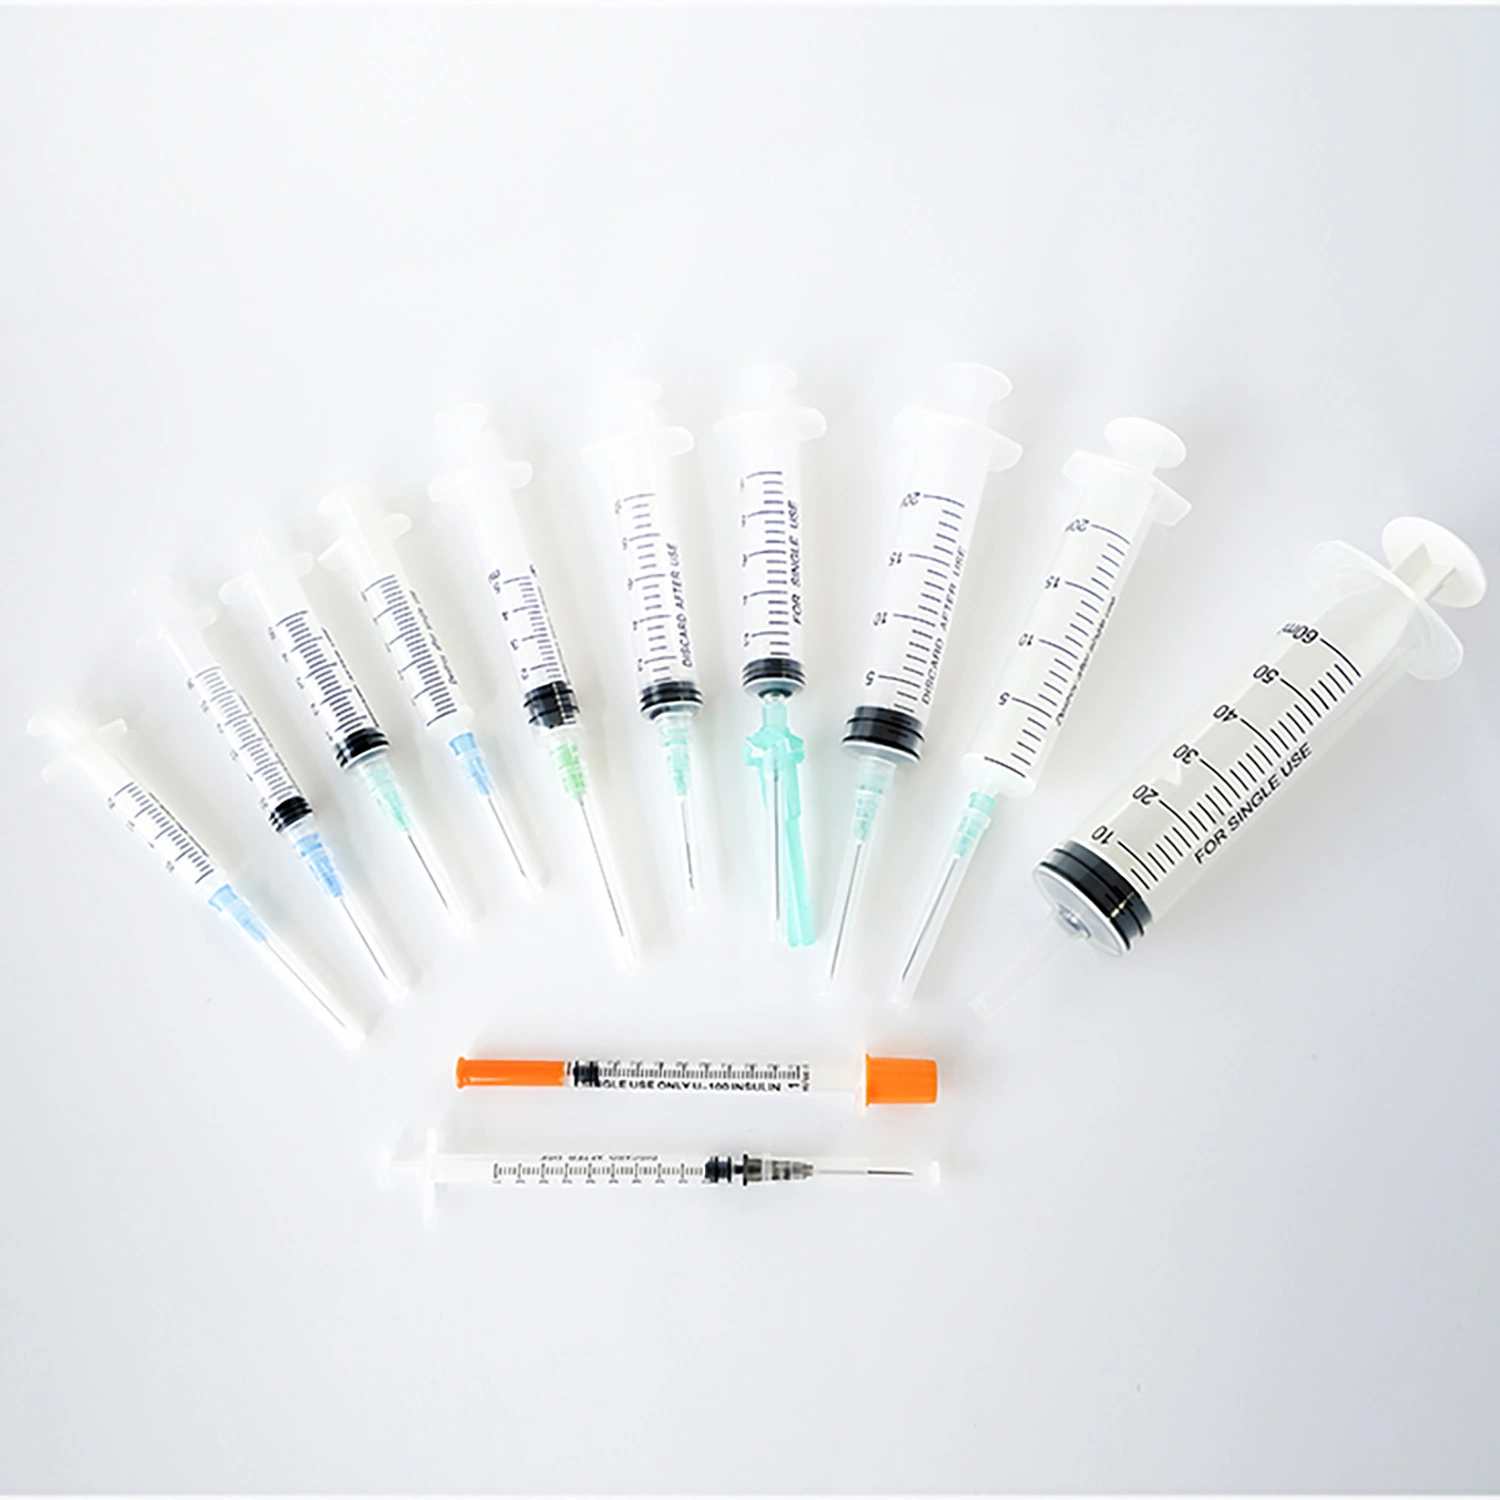 Factory Sterile Disposable Medical Syringes with Needles Best Price